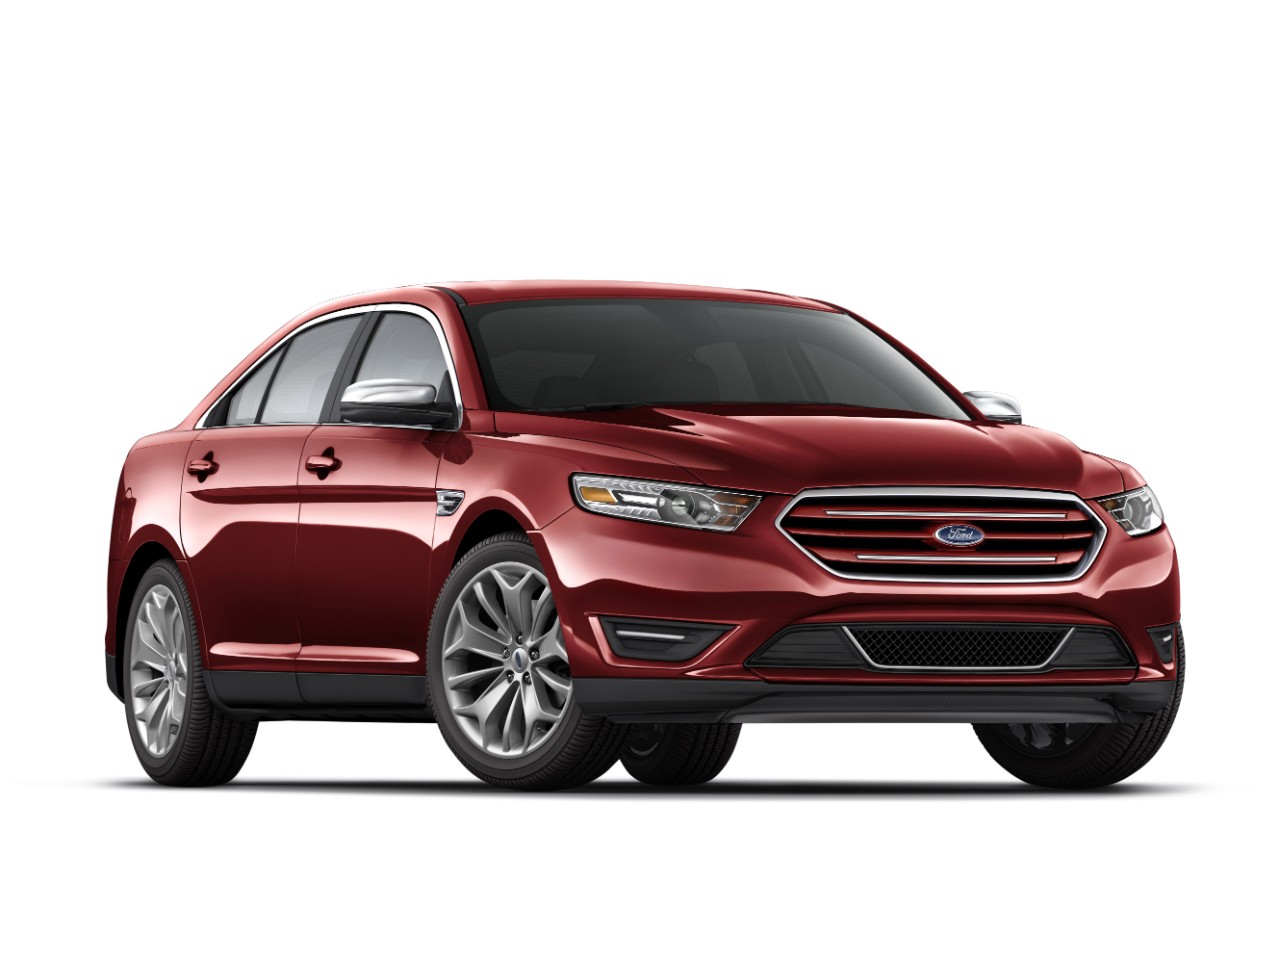 2016 Ford Taurus Review, Ratings, Specs, Prices, and Photos - The Car